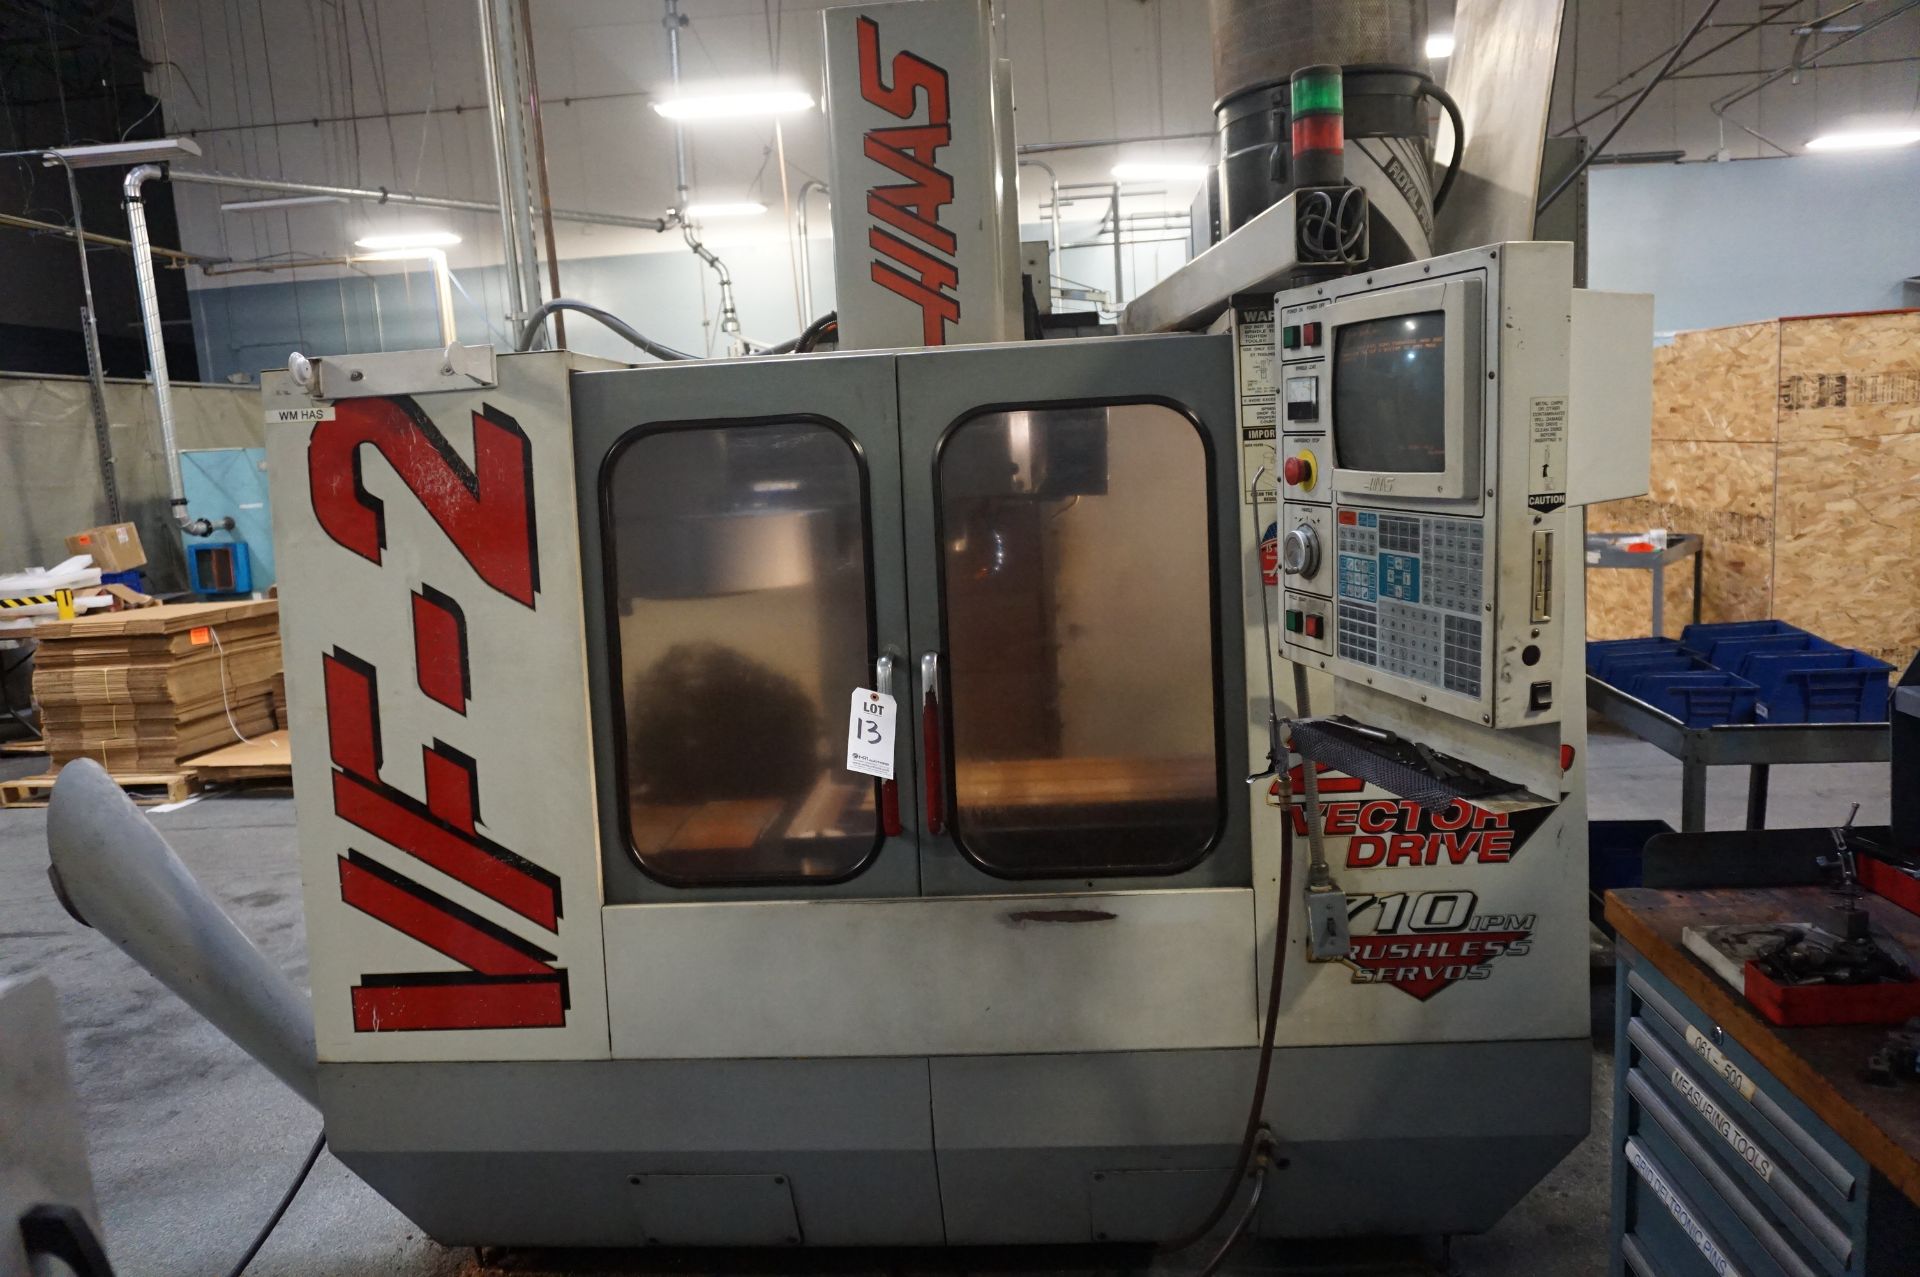 1999 HAAS VF-2 VERTICAL MACHINING CENTER, S/N 17306, PROGRAMMABLE COOLANT, ROYAL MISTBUSTER, 20 ATC